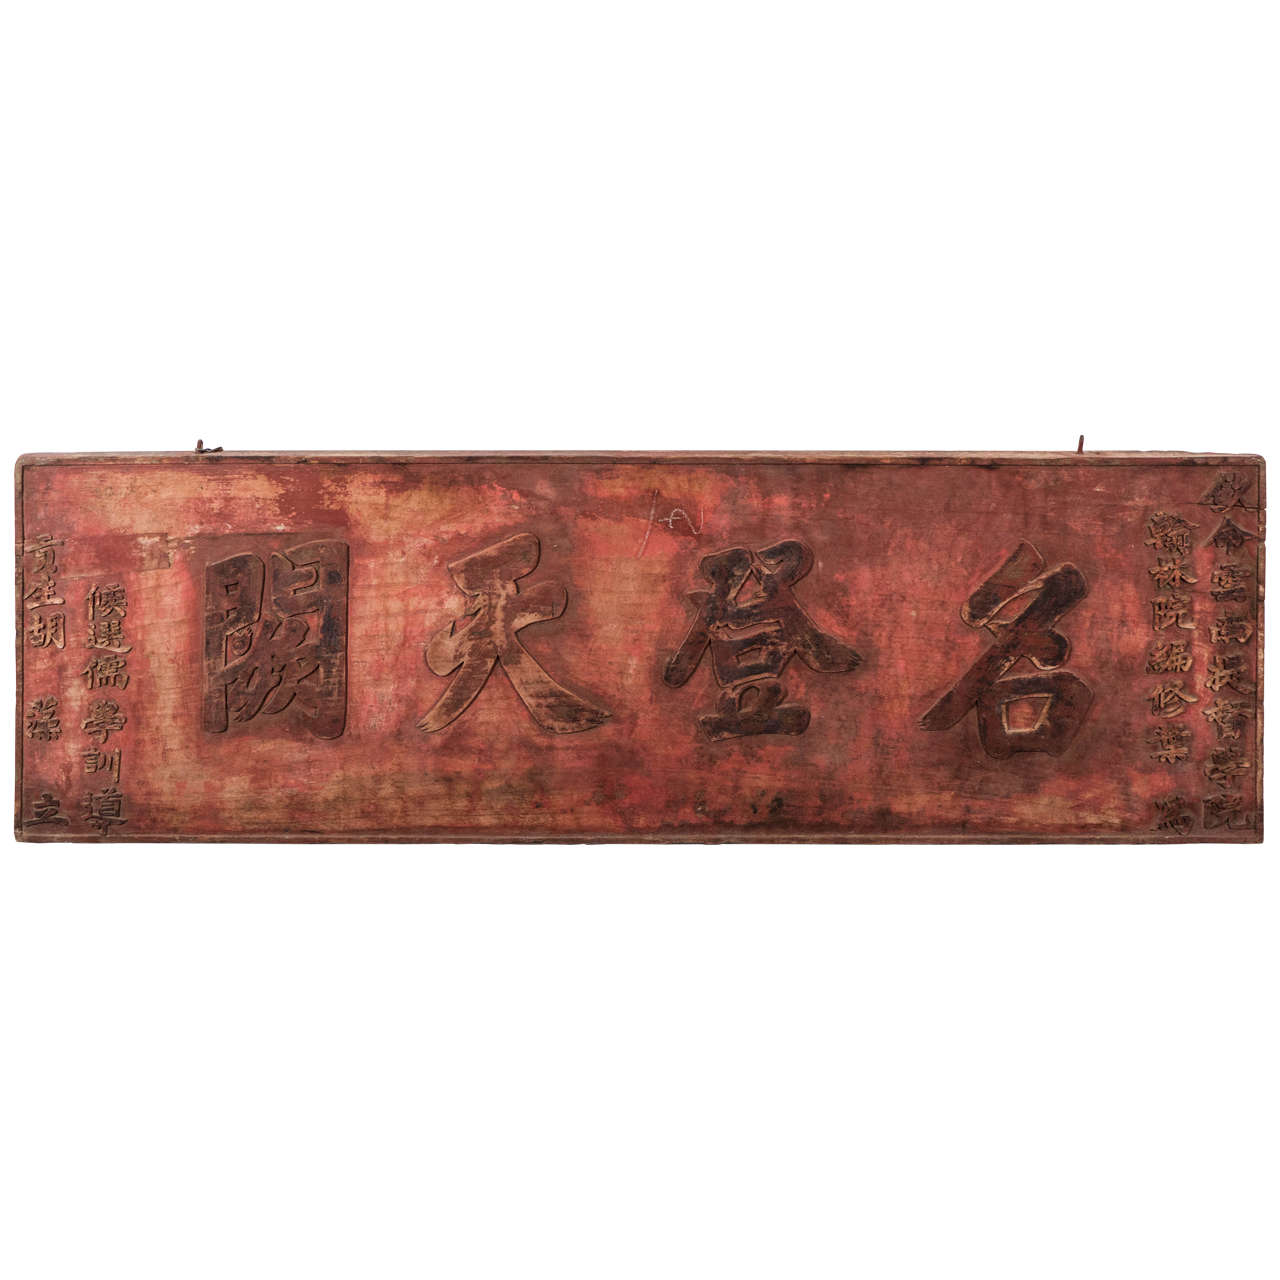 Chinese Meritorious Service Award with Original Faded Red Paint, circa 1850 For Sale